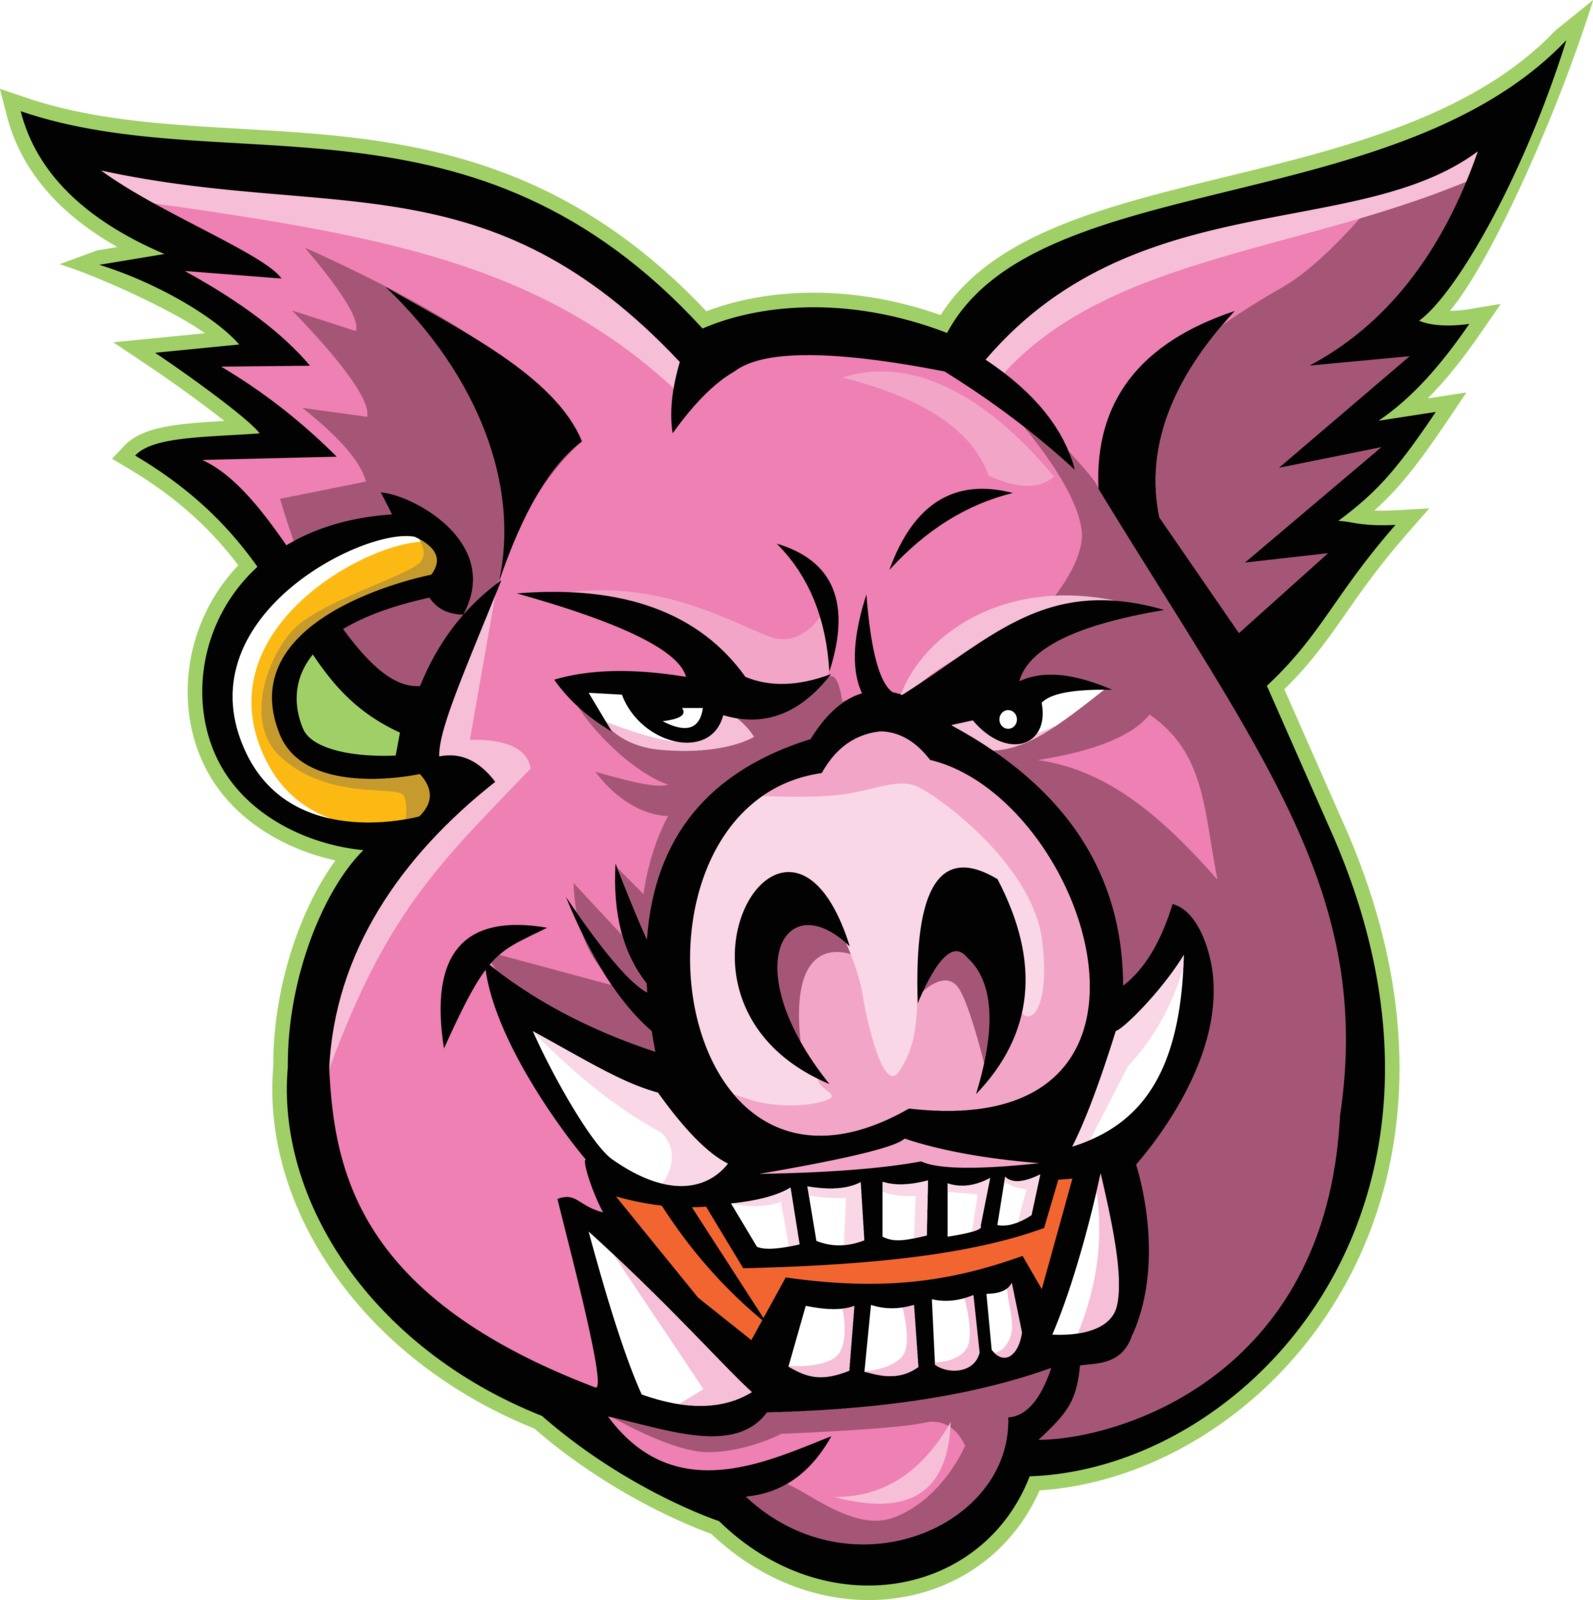 Mascot icon illustration of head of a pink wild pig, boar or hog wearing an earring  viewed from front on isolated background in retro style.